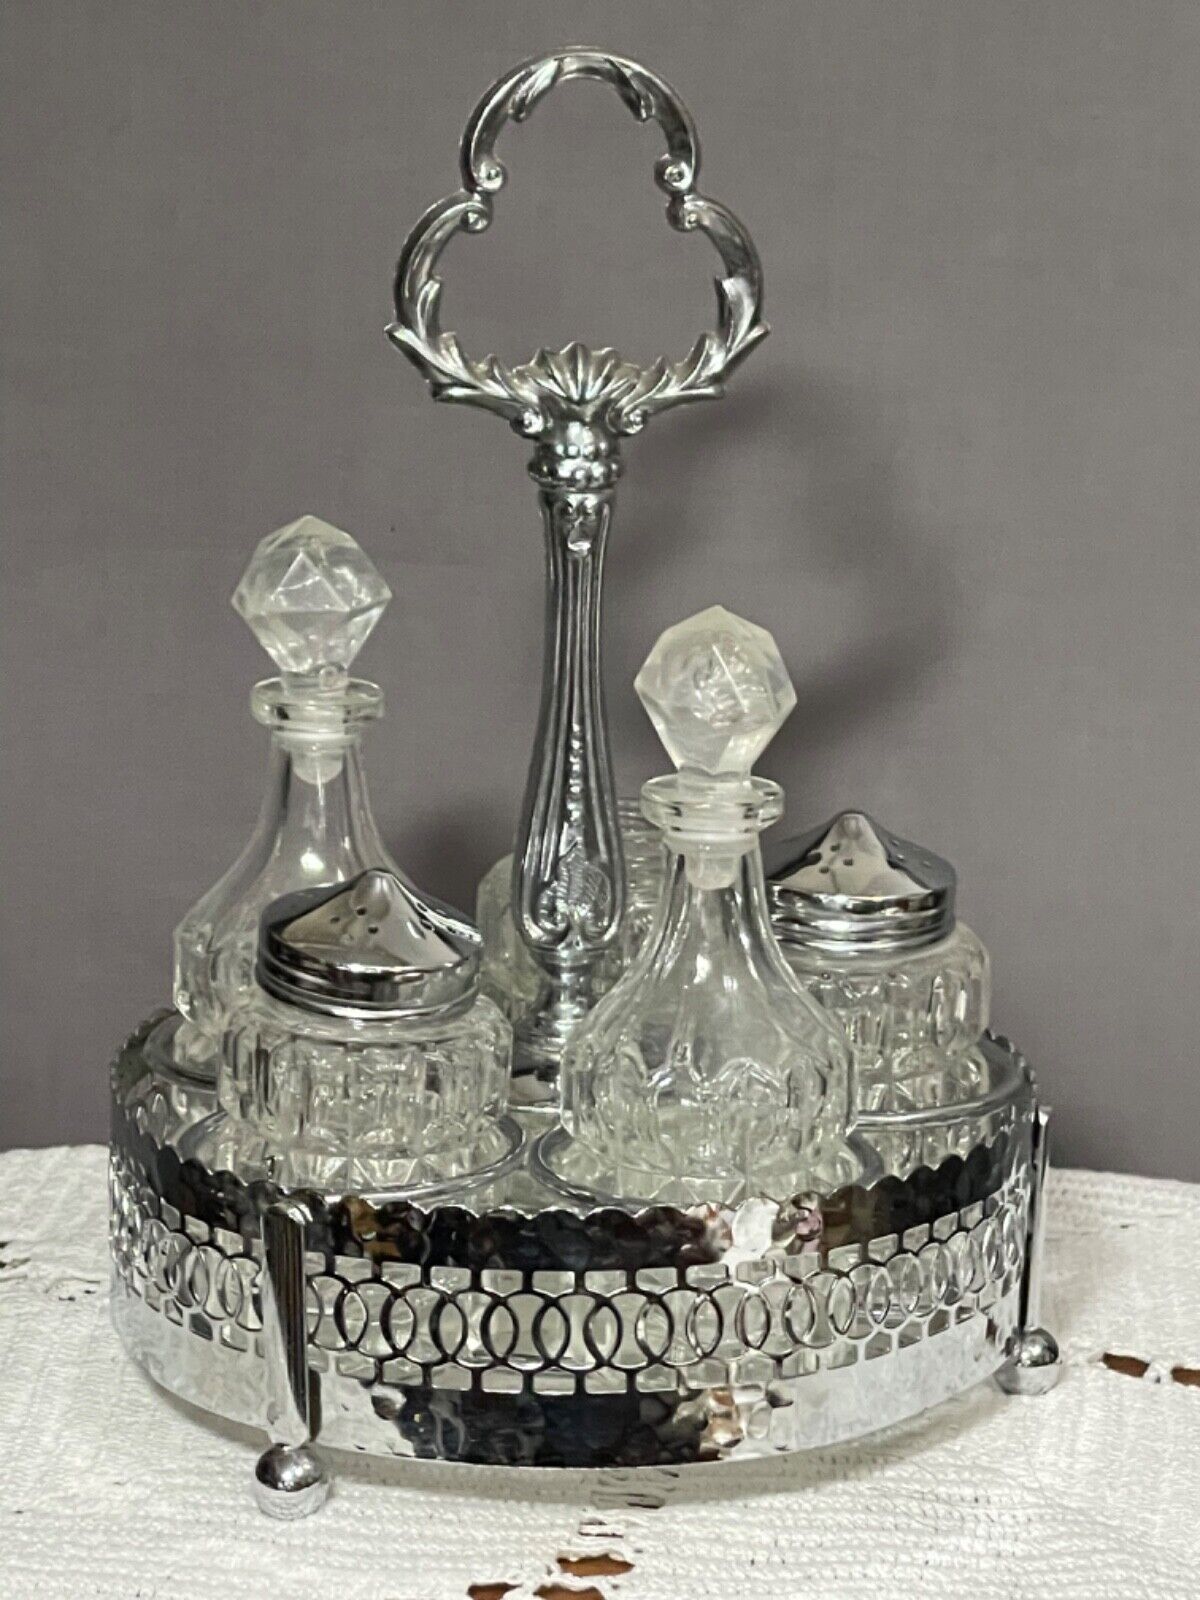 Vintage Silver Plated Queen Anne Style Cruet Set - Made in England